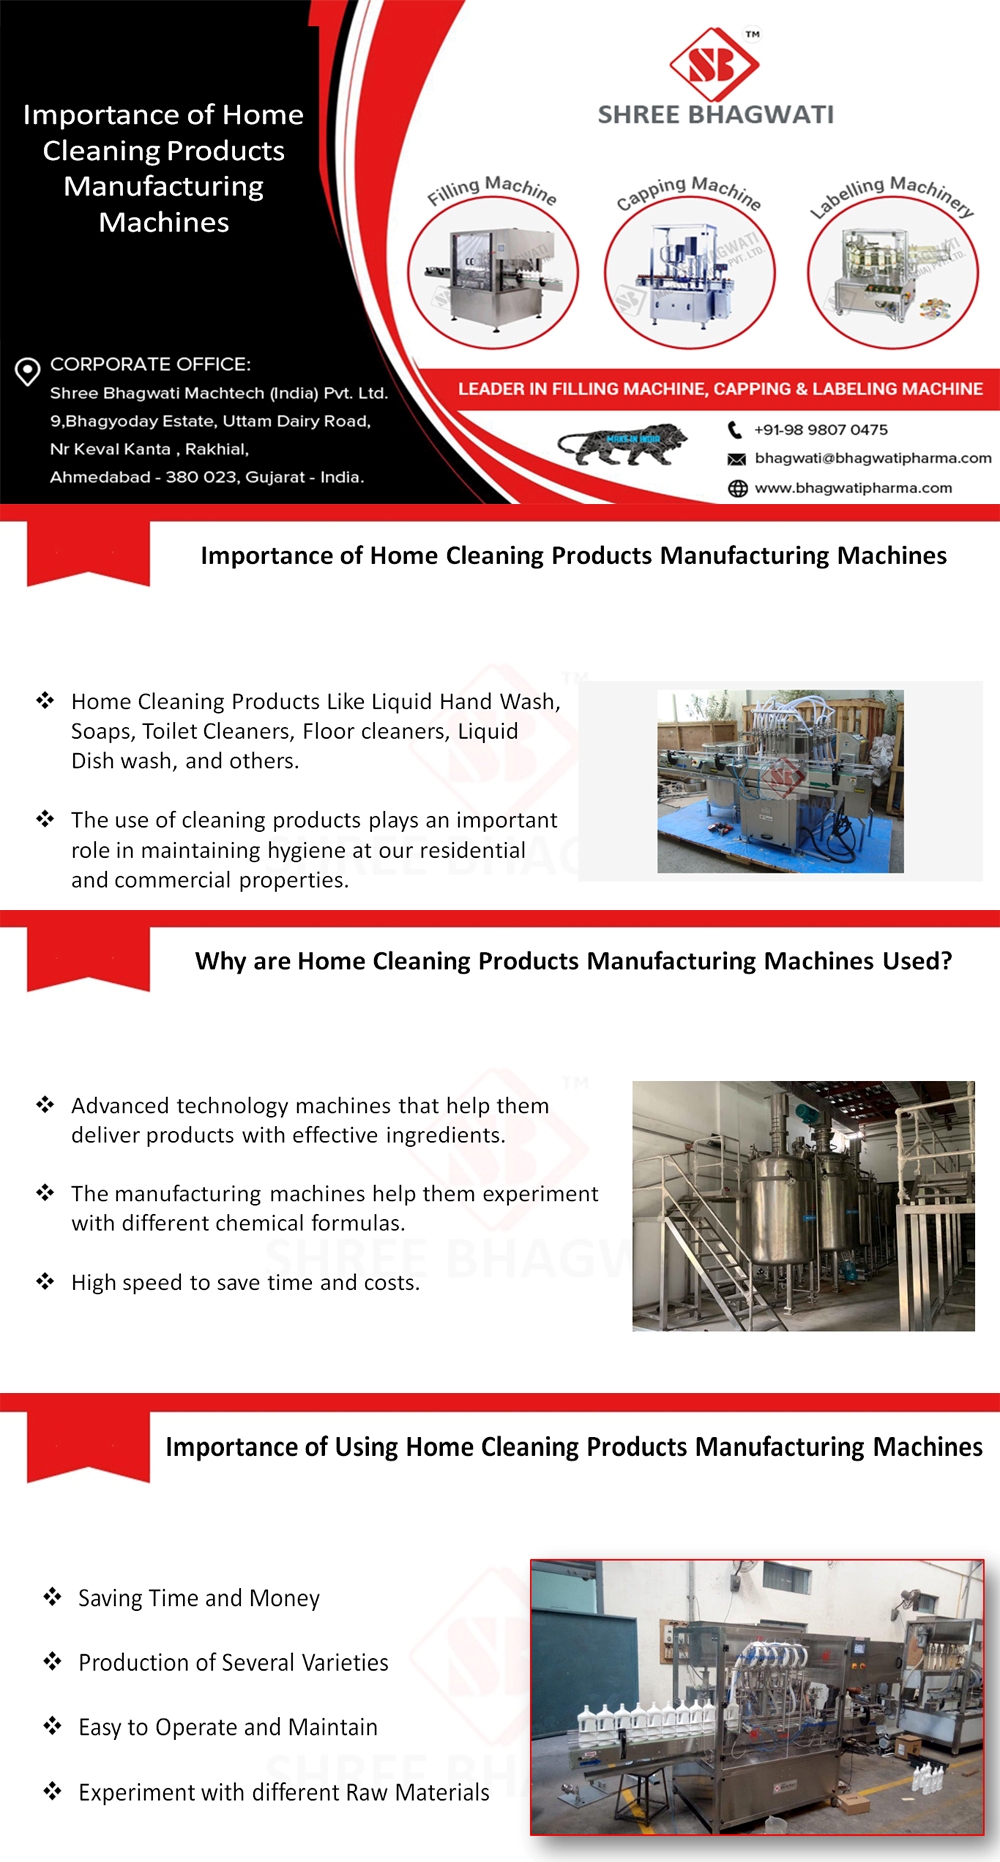 Importance of Home Cleaning Products Manufacturing Machines